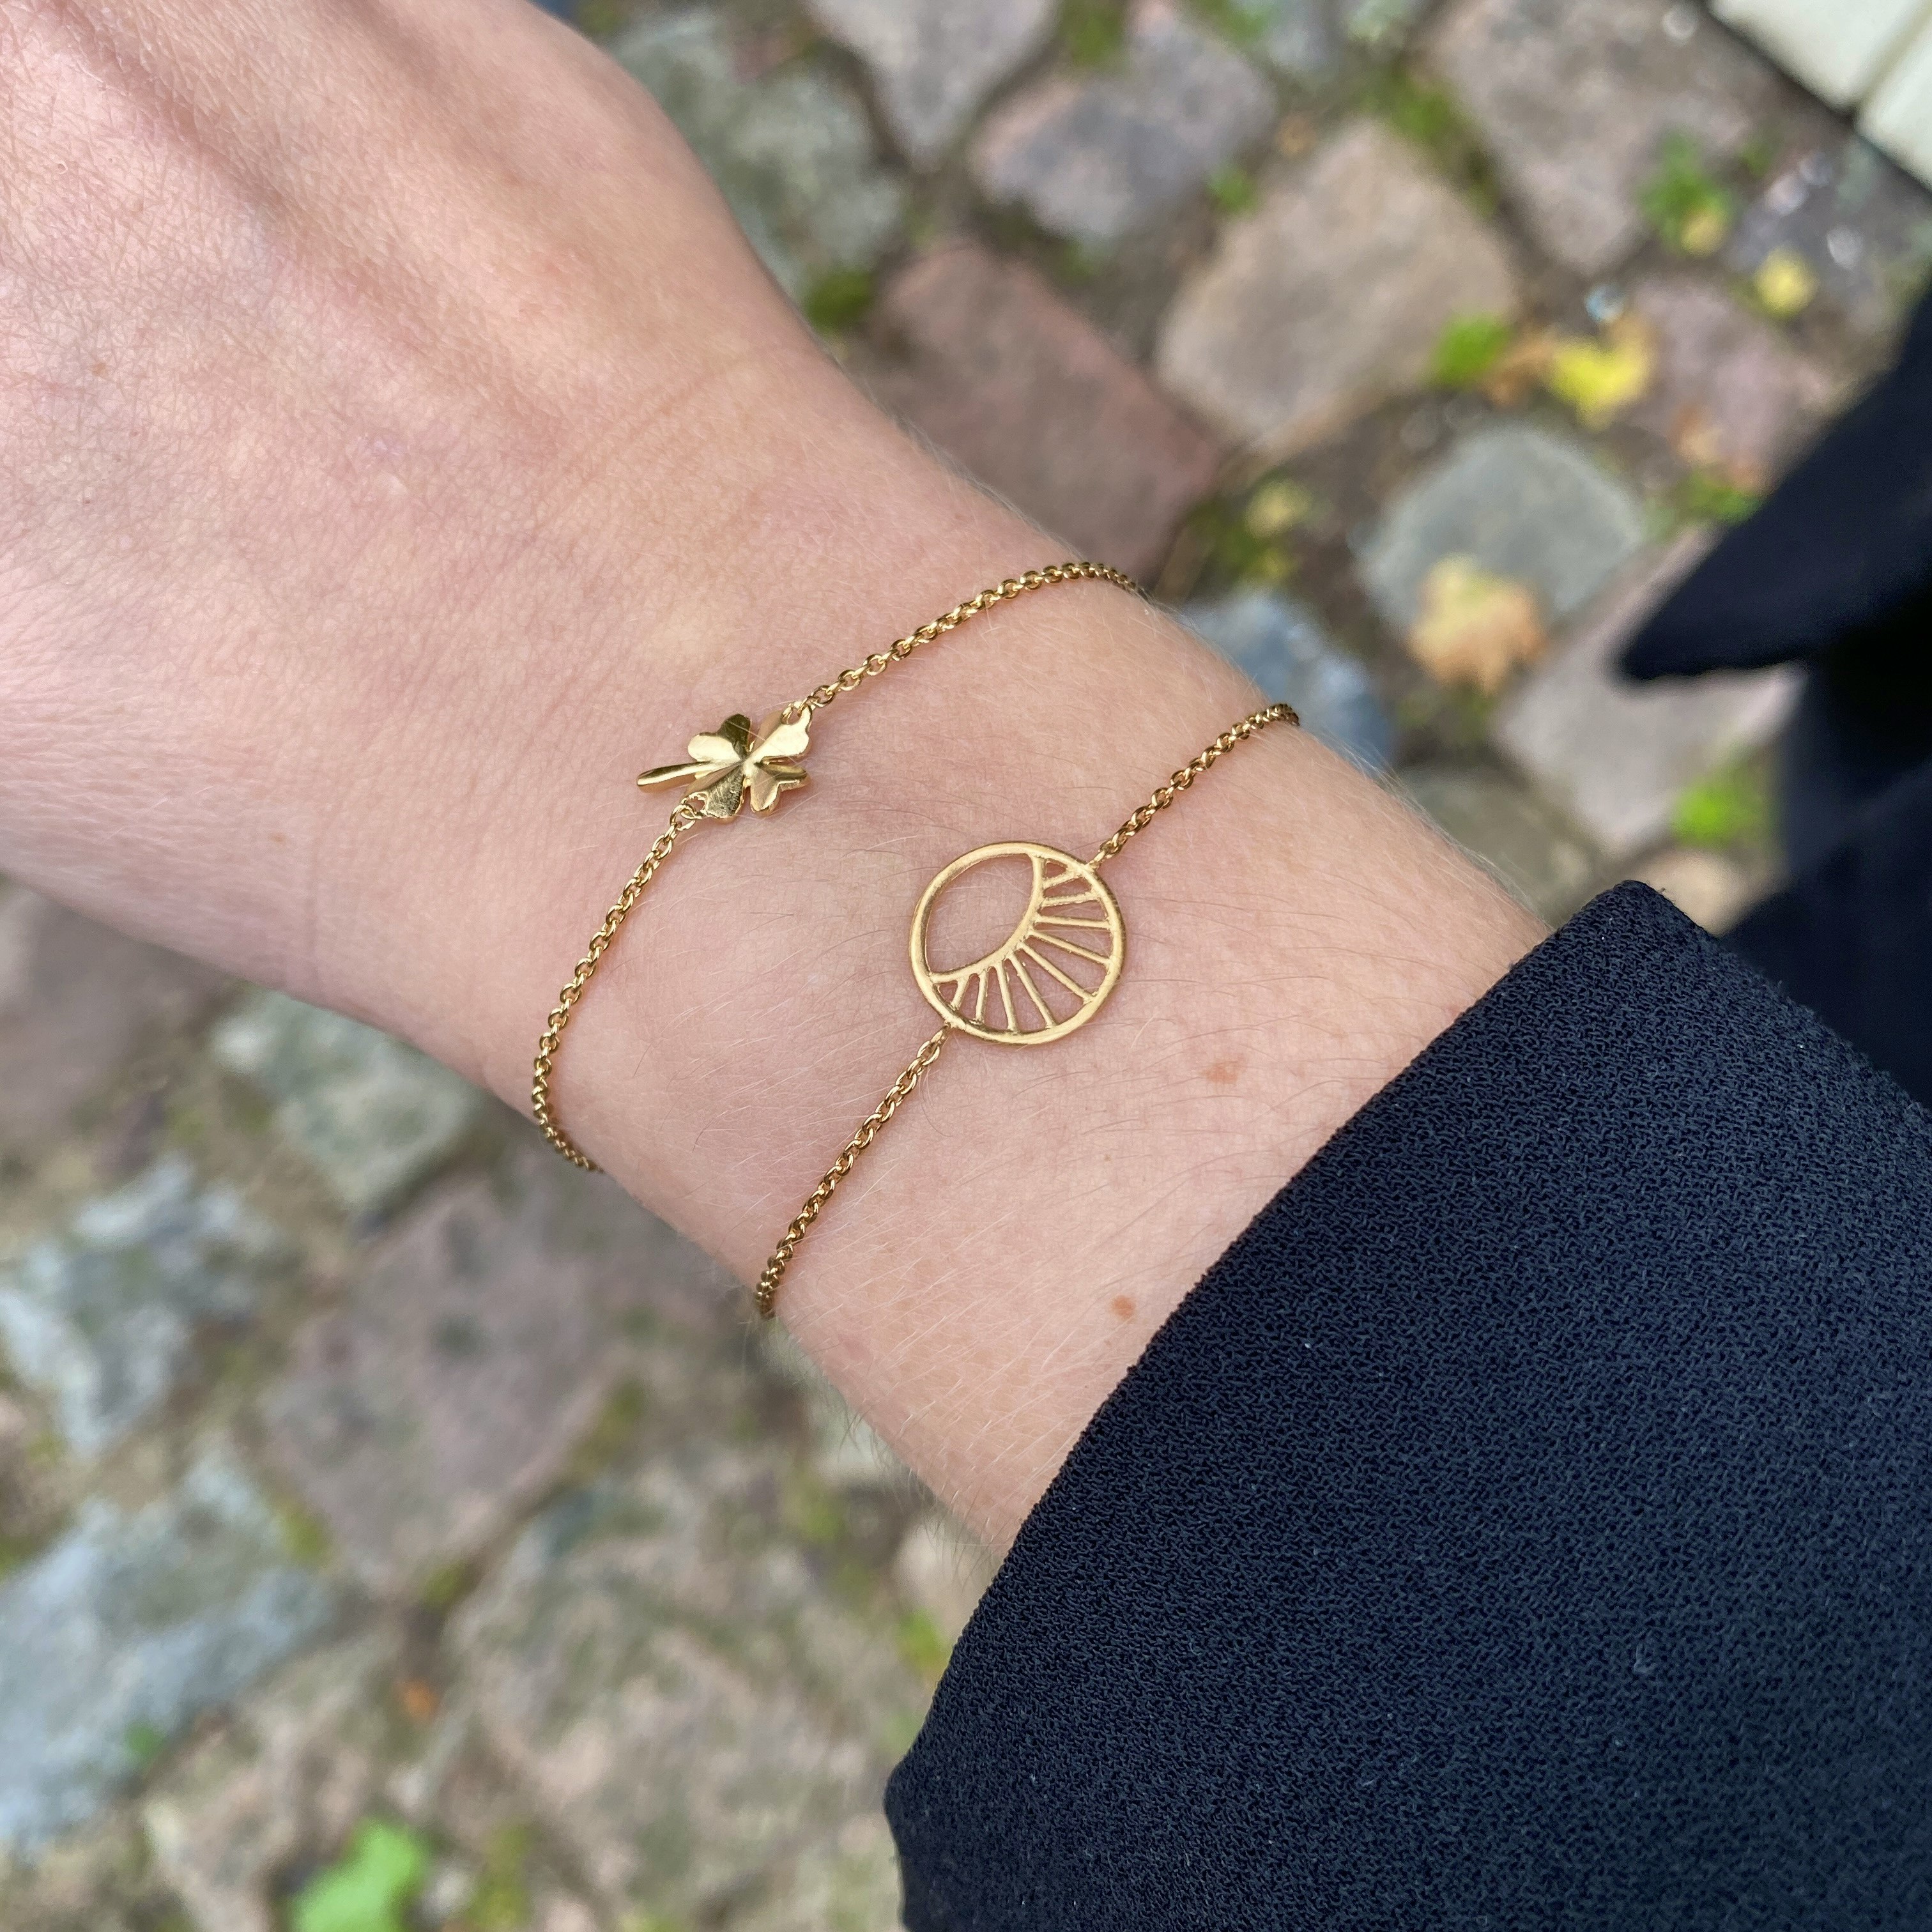 Clover bracelet from Pernille Corydon in Goldplated-Silver Sterling 925